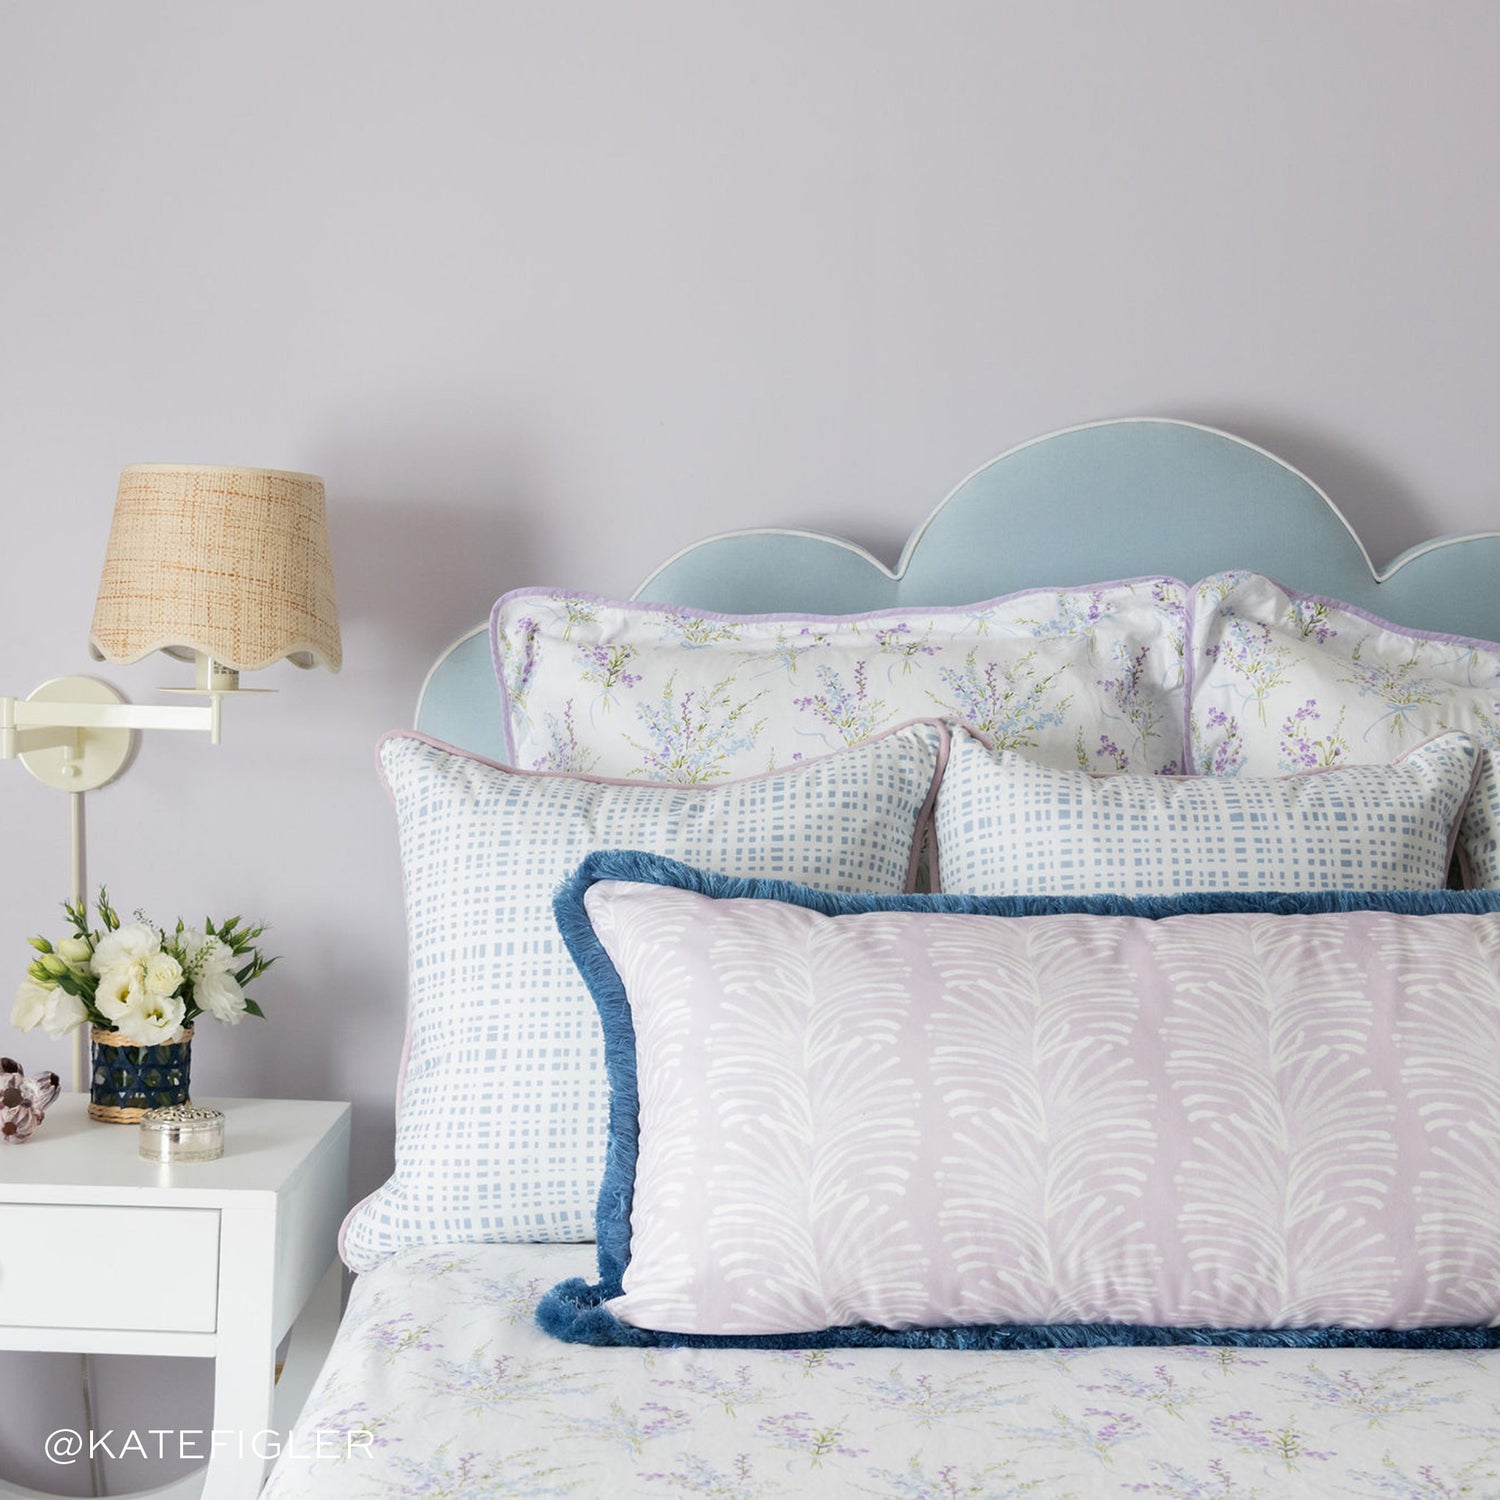 Bedroom styled with three blue gingham pillows and a Lavender Botanical Stripe Lumbar with blue fringe on bed next to white nightstand with lamp and flowers. Photo taken by Kate Figler